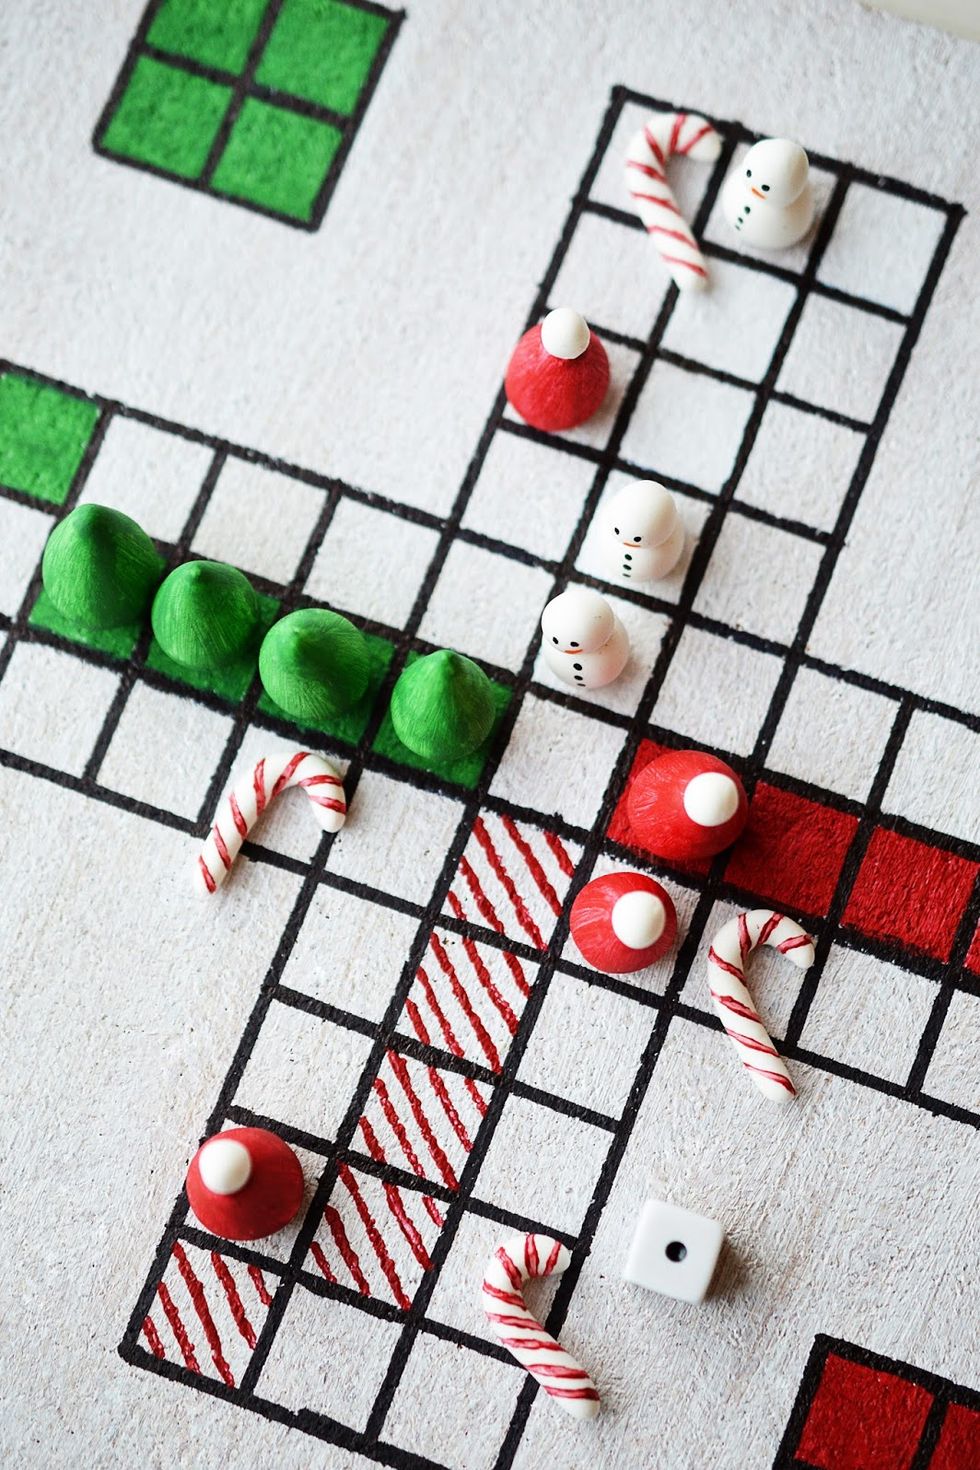 How to Make a DIY Board Game for Family Game Night